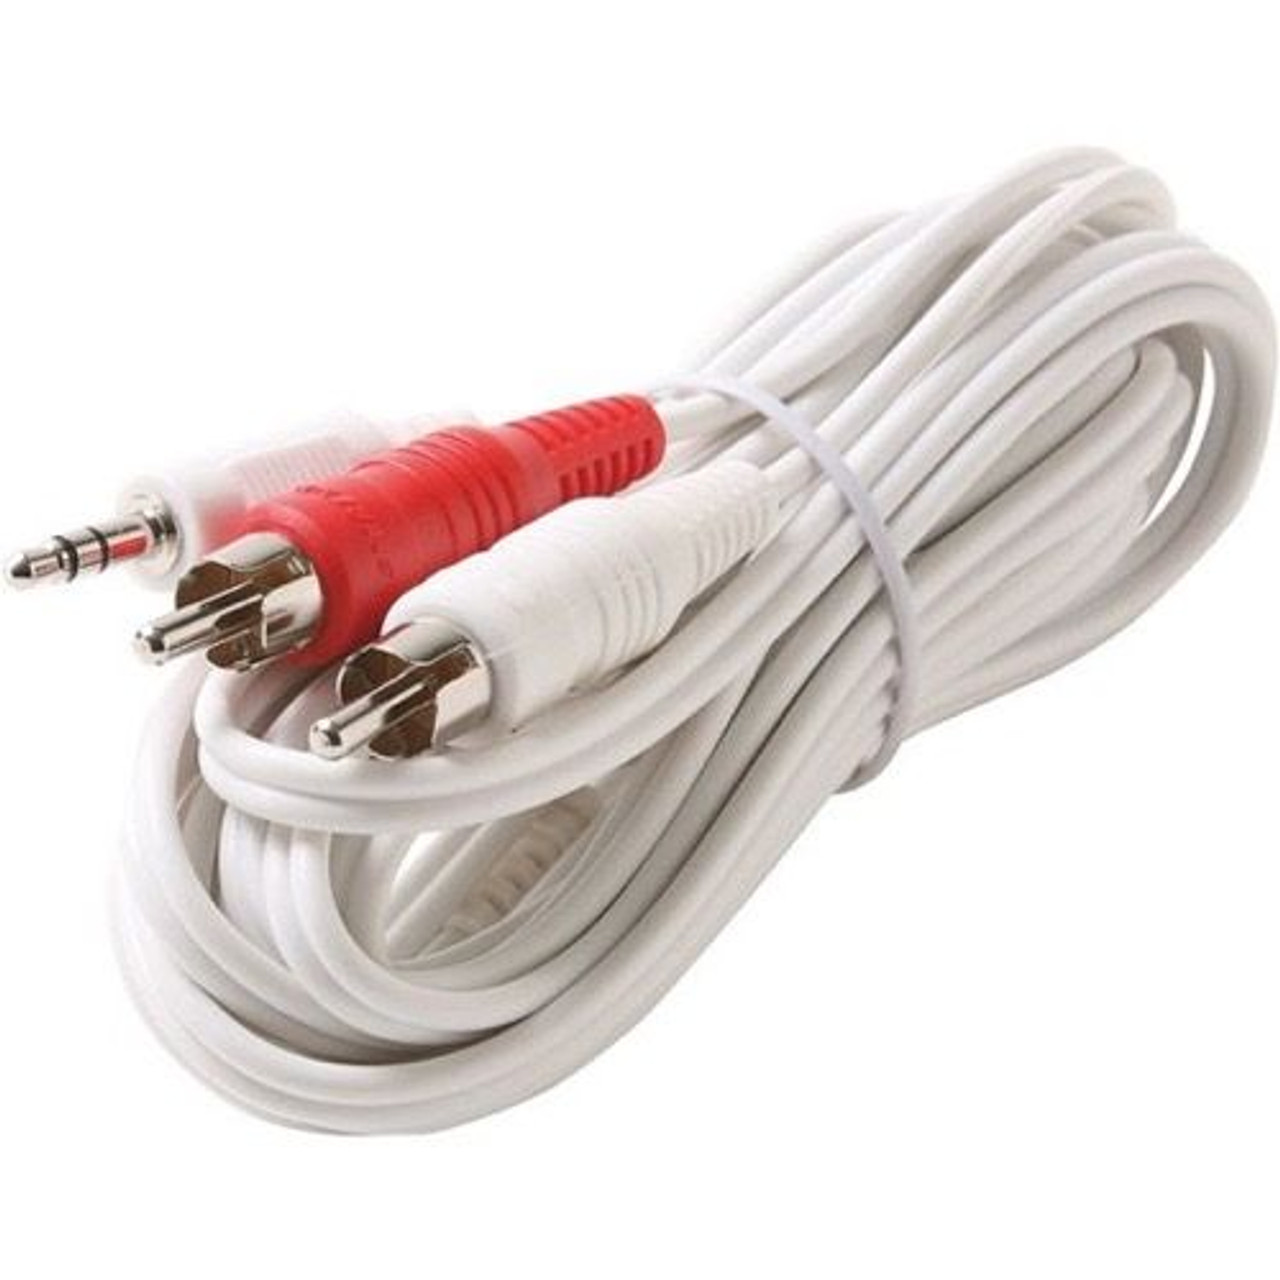 Eagle 12' FT 3.5mm Male to 2 RCA Y Cable iPod White Dual Plug Cable White Stereo 3.5mm Male to Dual RCA Male Adapter Plug Shielded Audio Splitter Cable Signal Separating Component Jack Adapter Cable